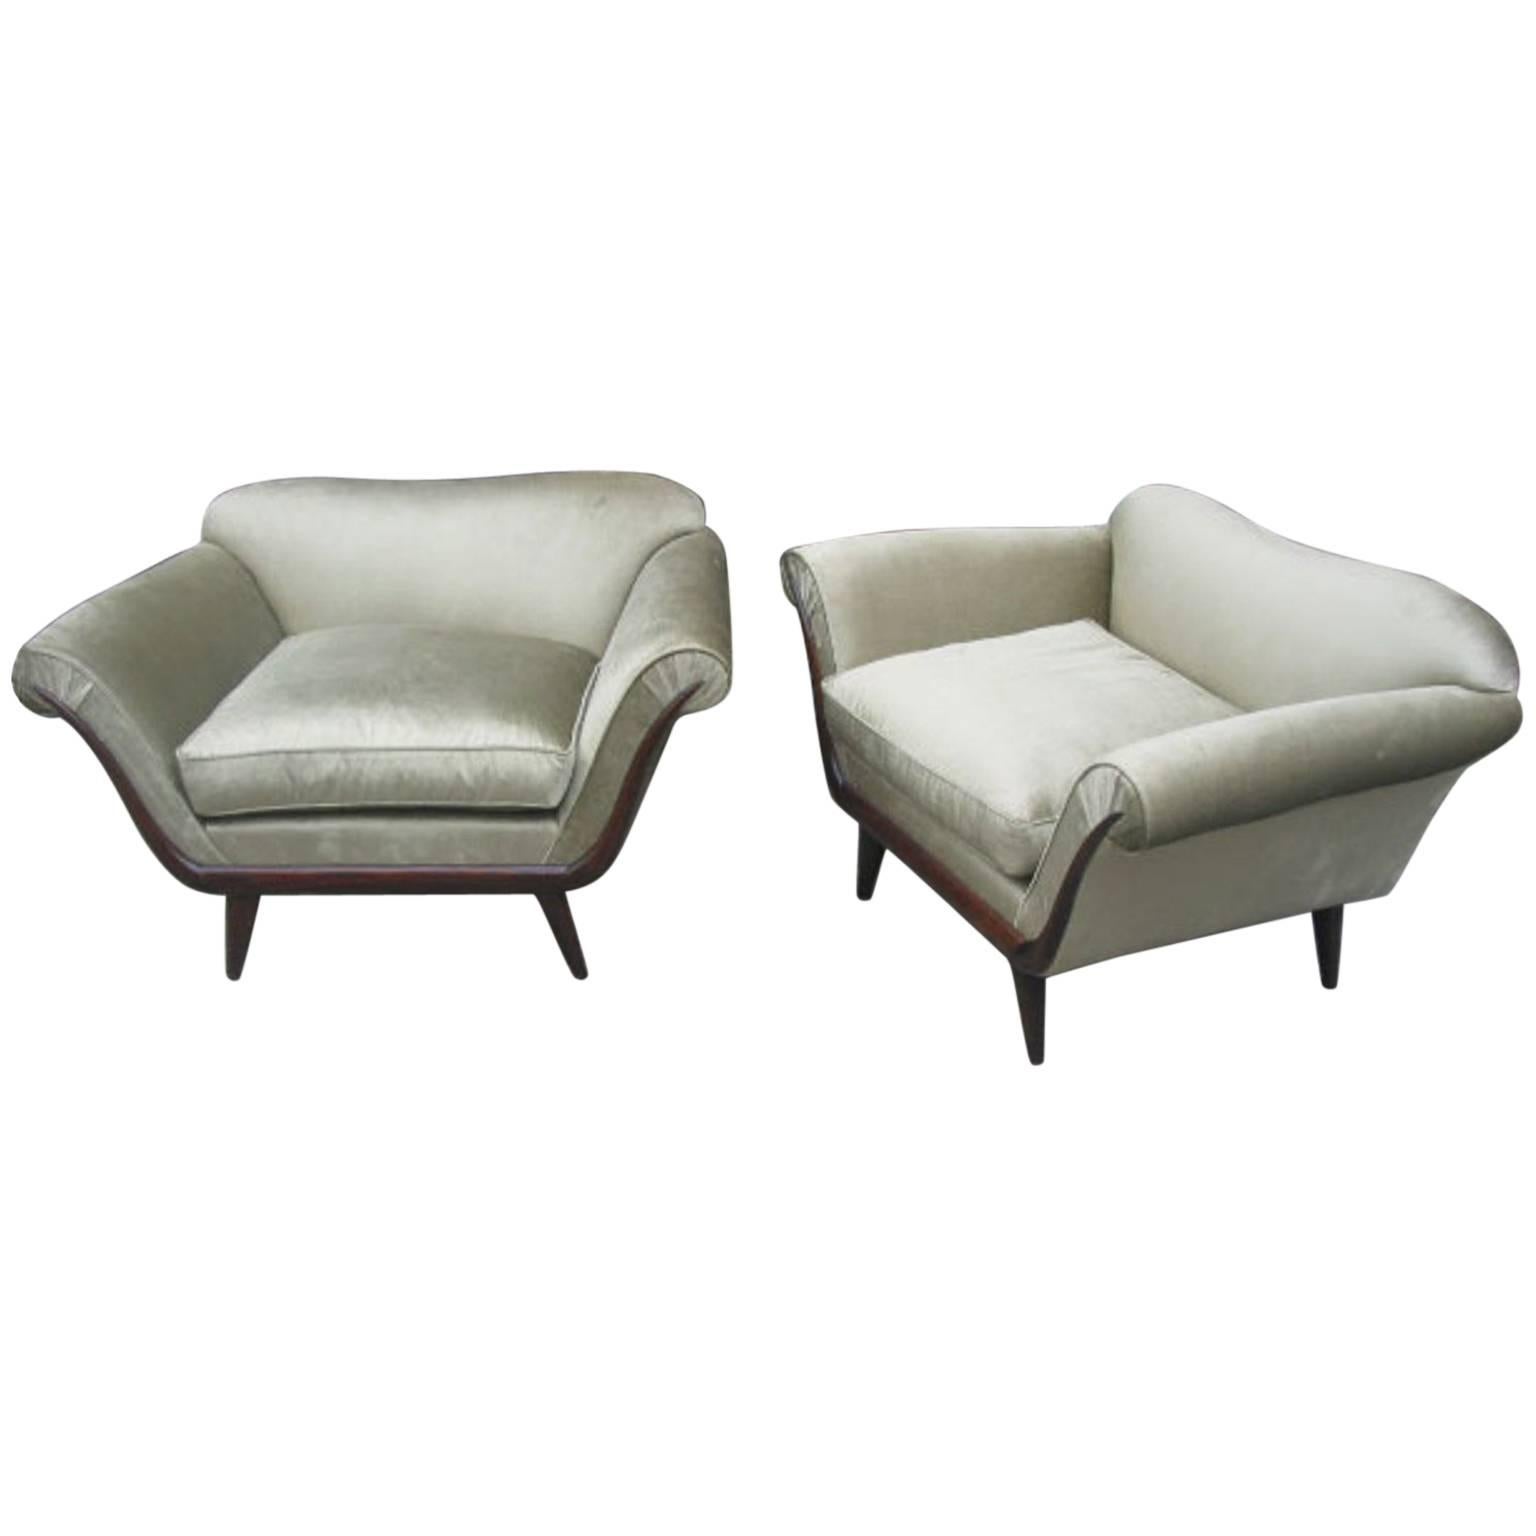 Pair of Armchairs by G. Ulrich, Italian, 1940s For Sale